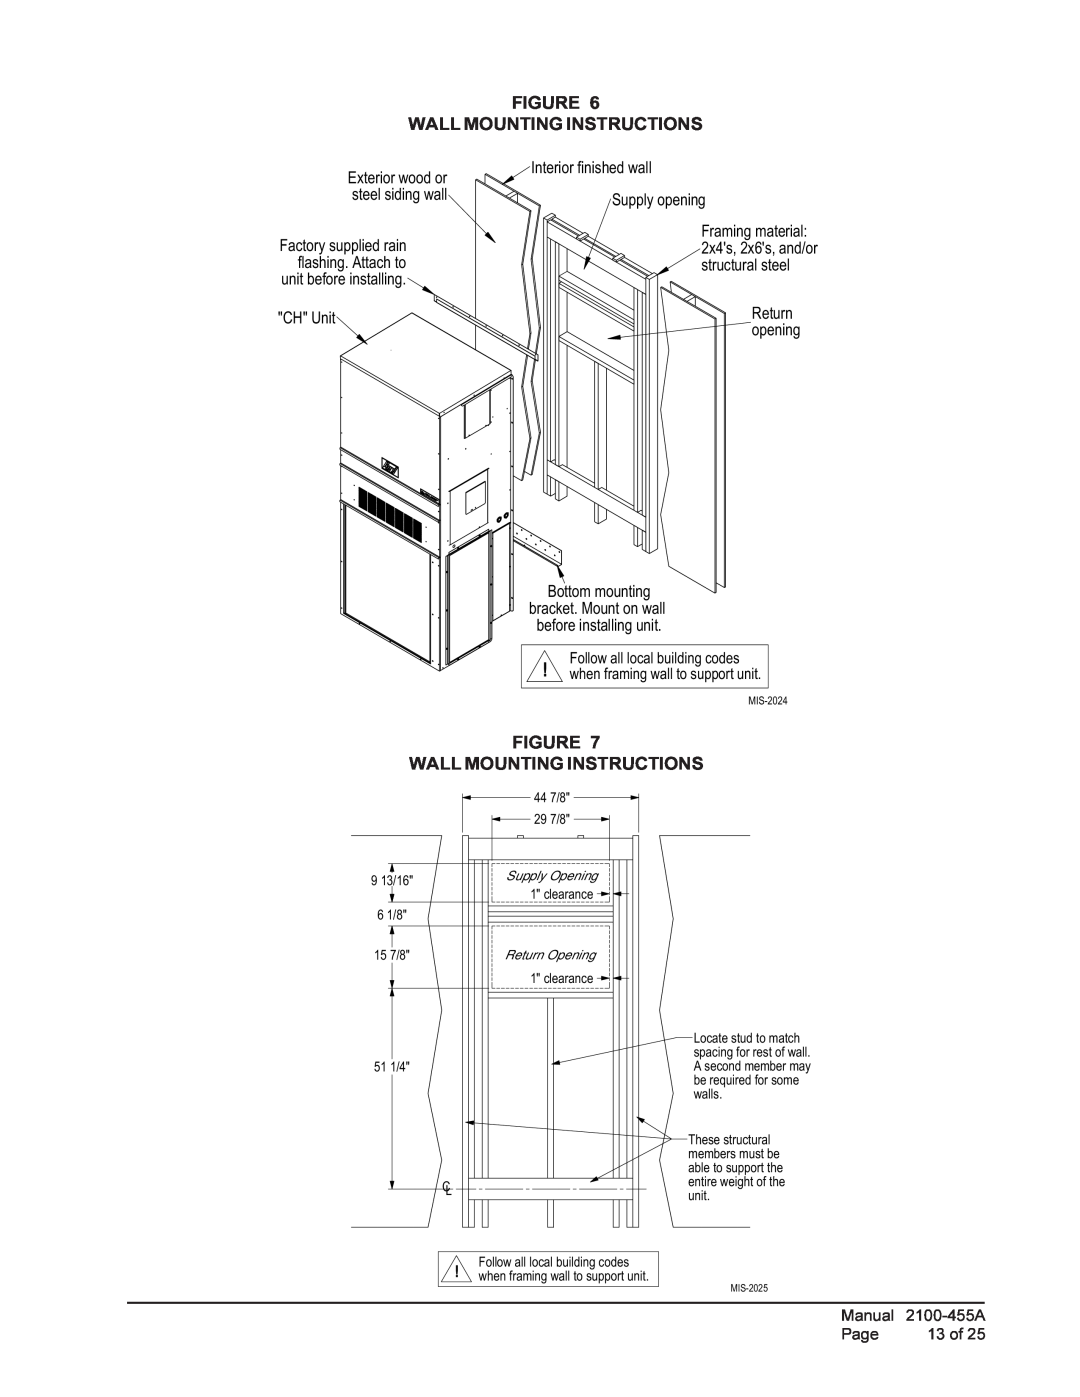 Bard CH5S1, CH4S1, CH3S1 installation instructions Figure Wall Mounting Instructions 